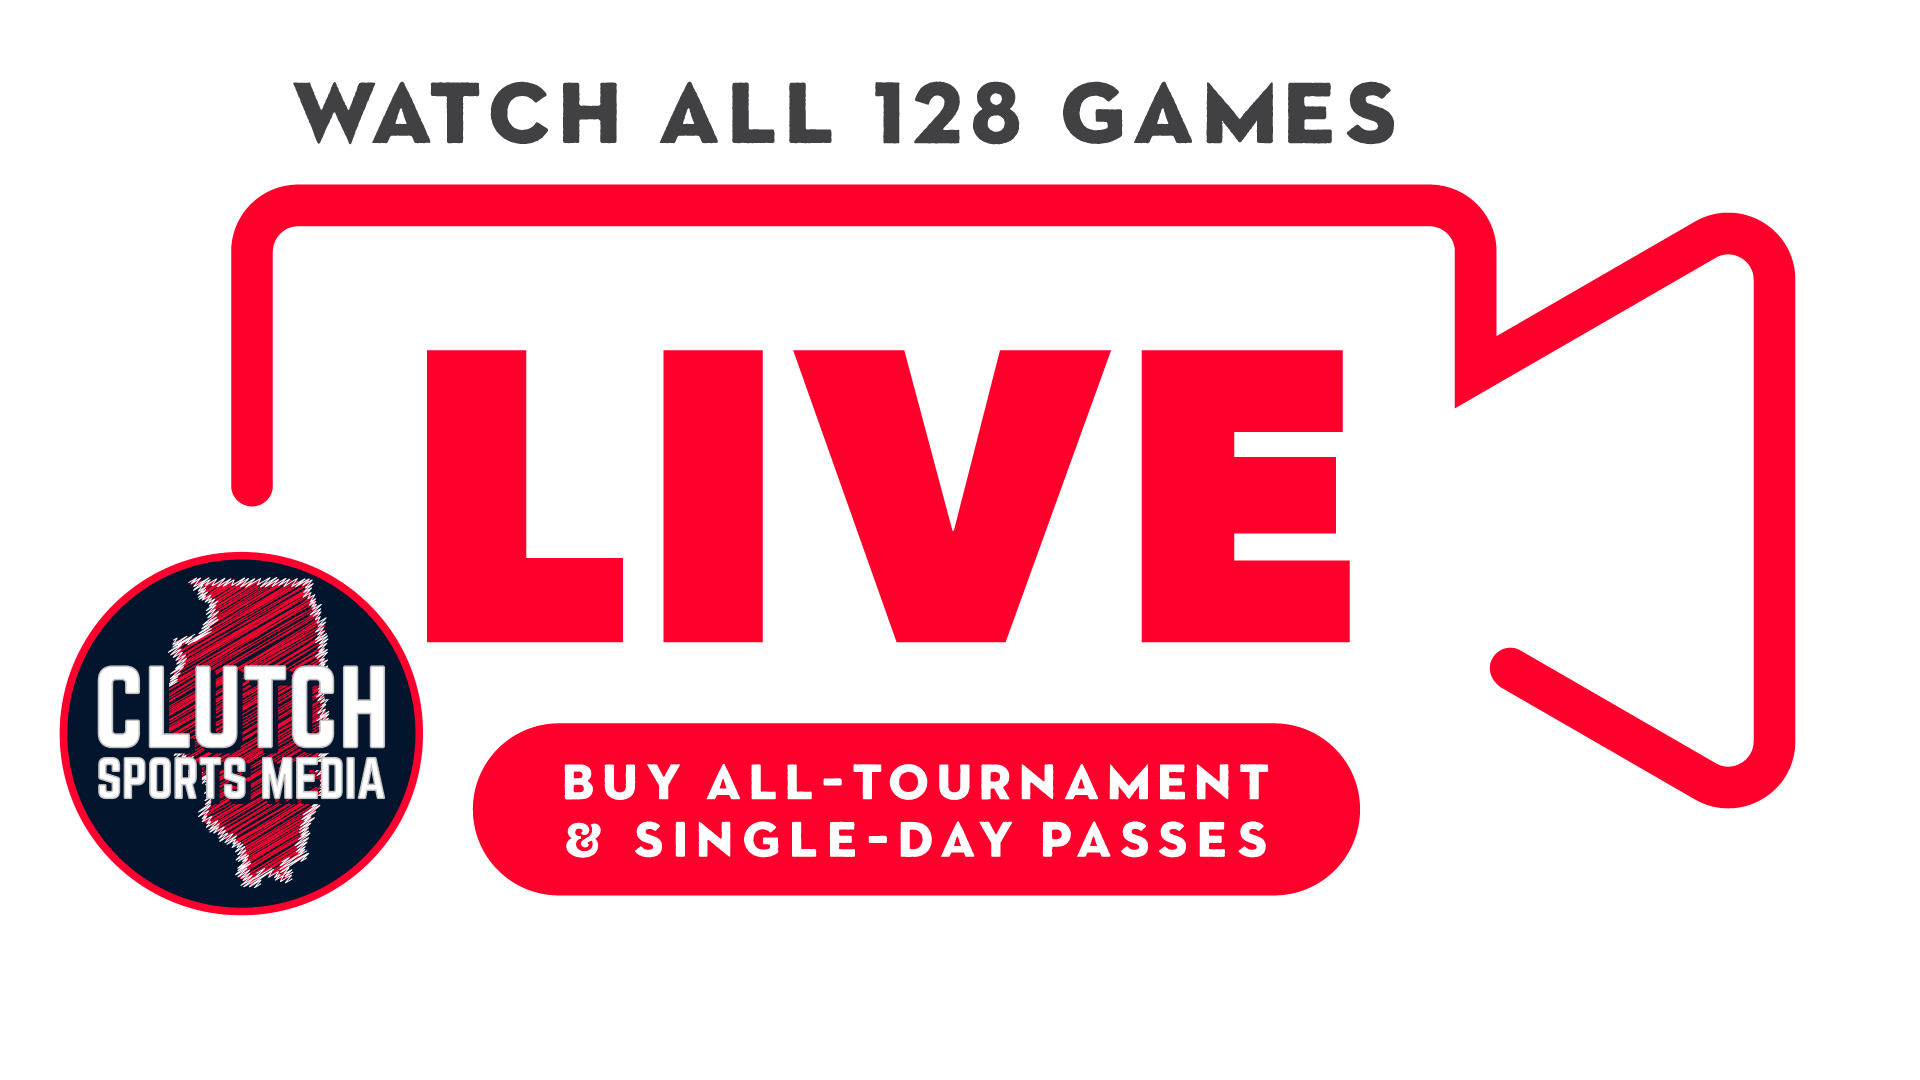 Watch All 128 Games of The Classic via Clutch Sports Media